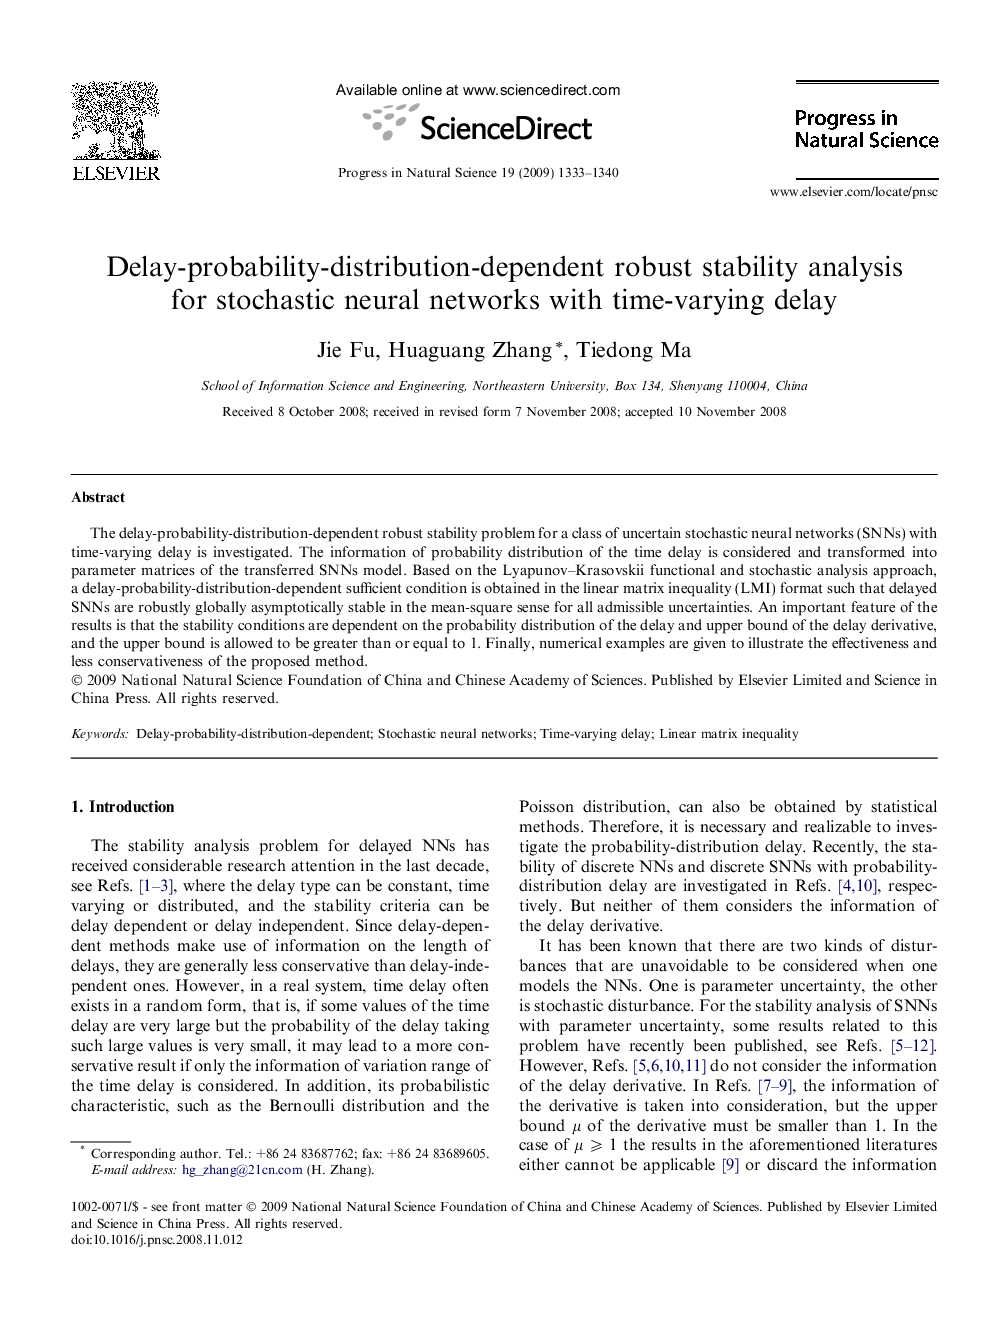 Delay-probability-distribution-dependent robust stability analysis for stochastic neural networks with time-varying delay